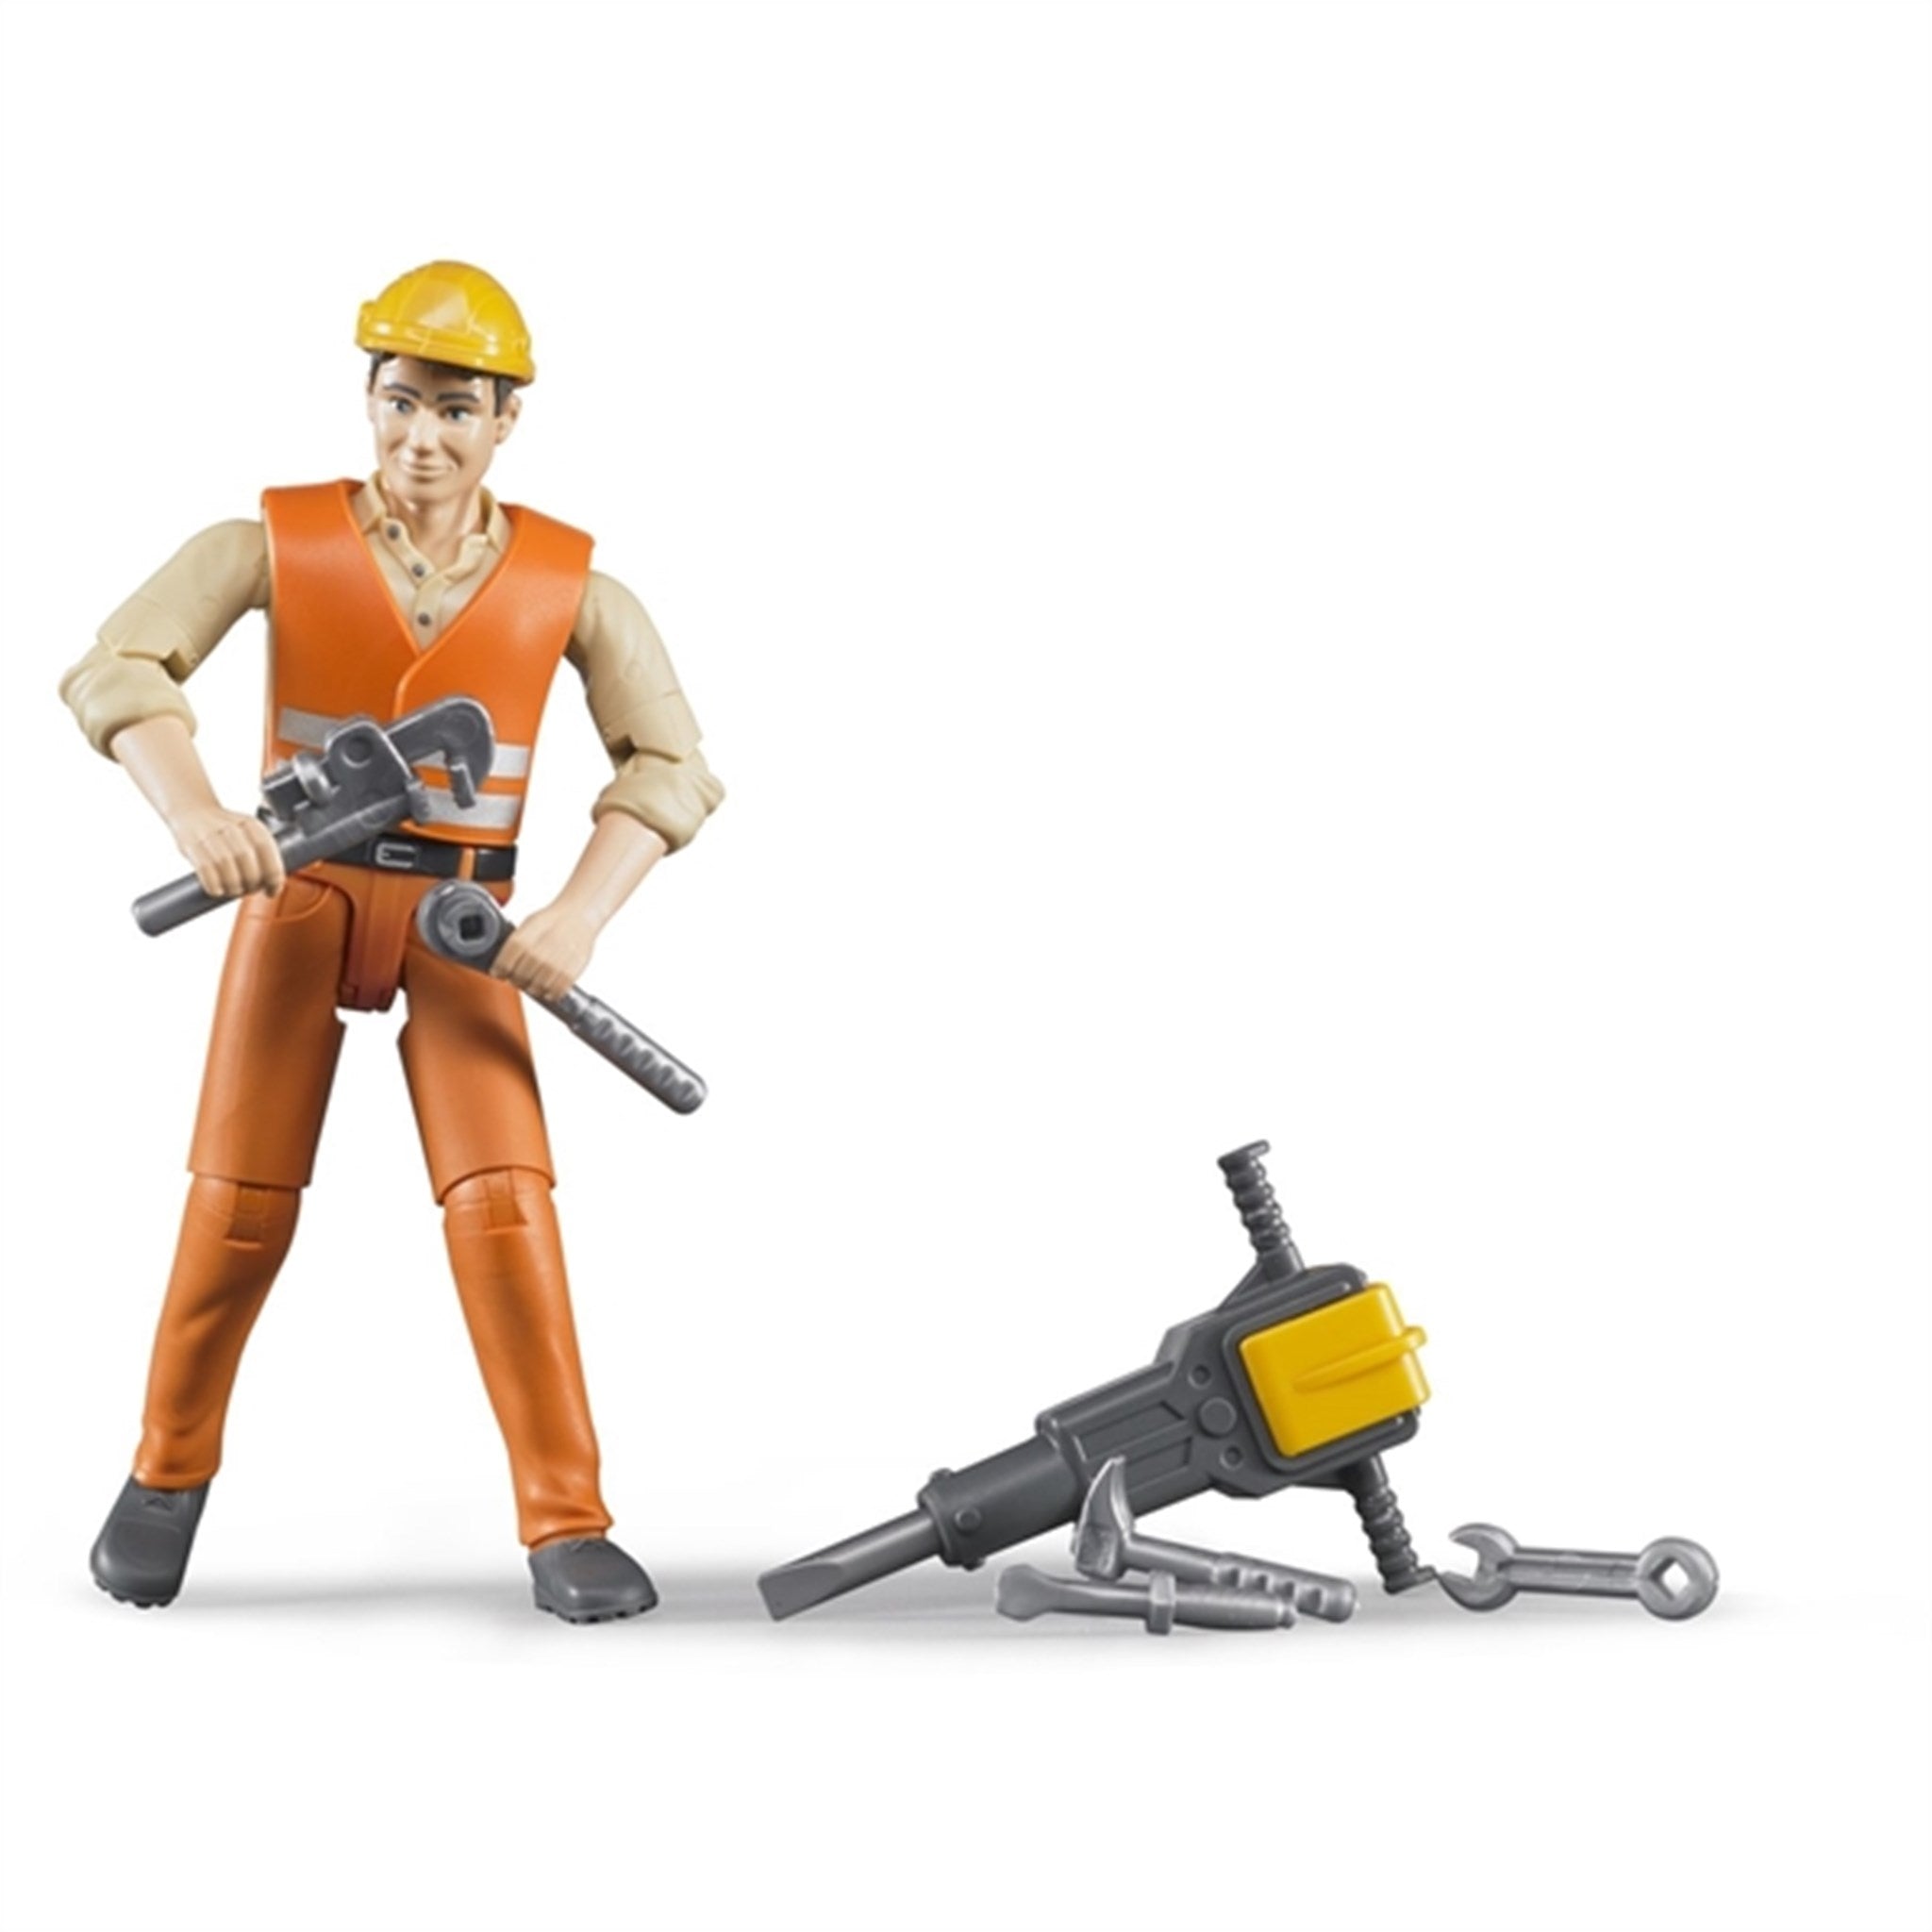 Bruder Bworld Construction Worker with Accessories 2